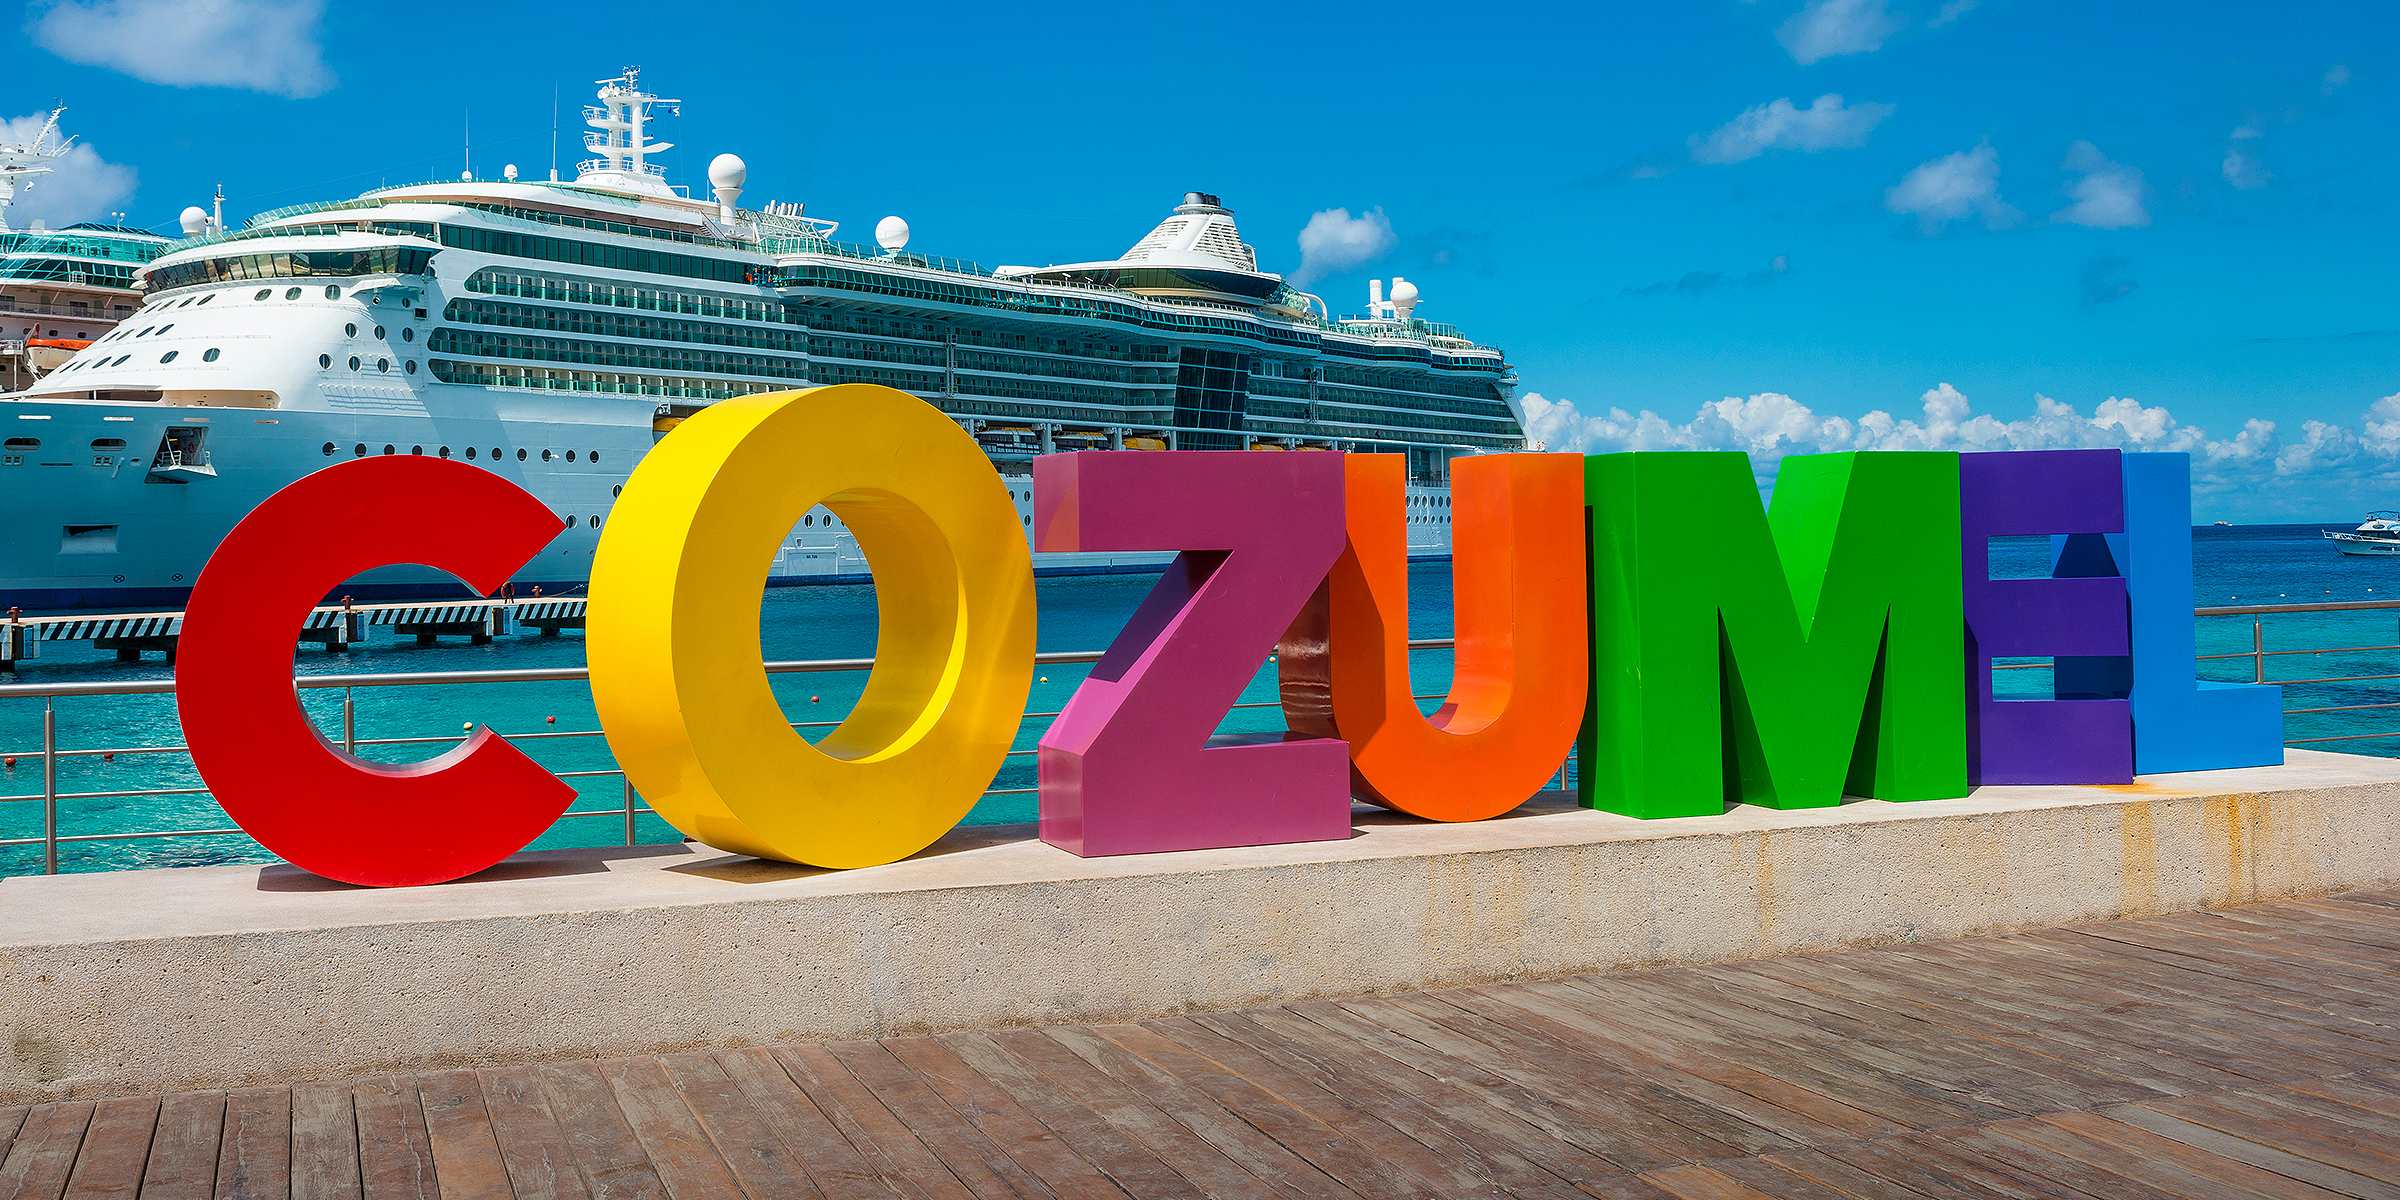 A cruise ship anchored near the Cozumel sign at the port. | Source: Shutterstock